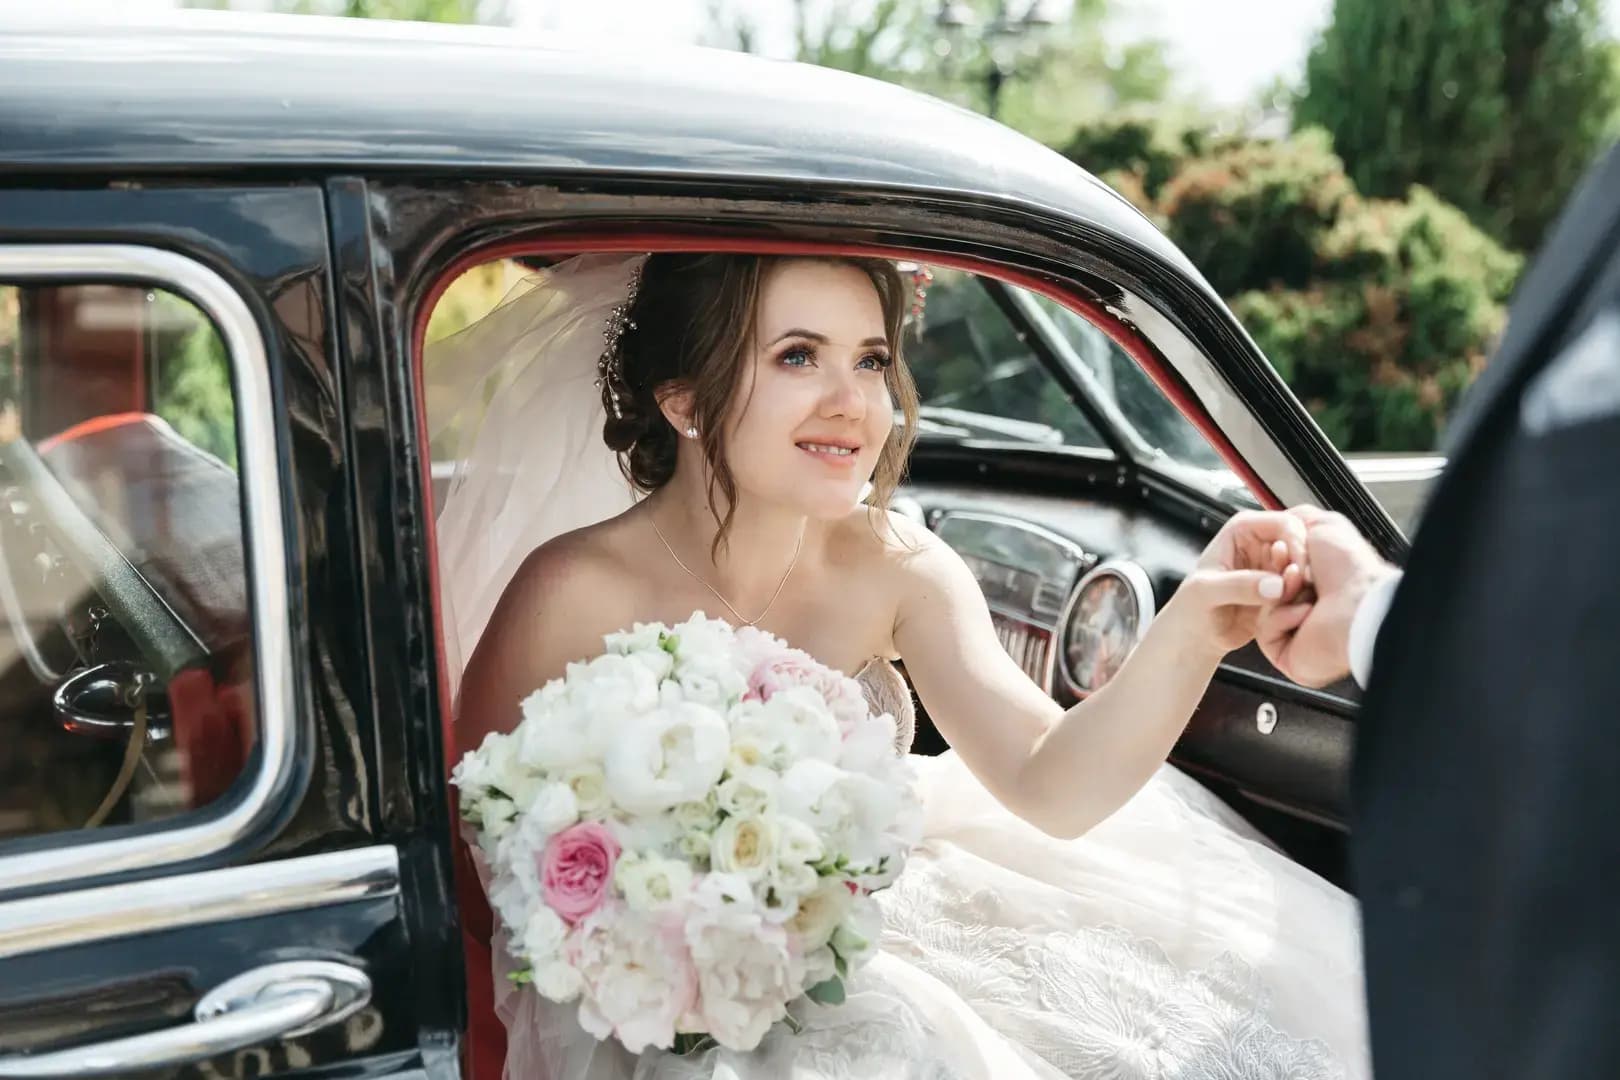 Chauffeur Wedding Car Hire Service Melbourne- Check the Cars before Booking